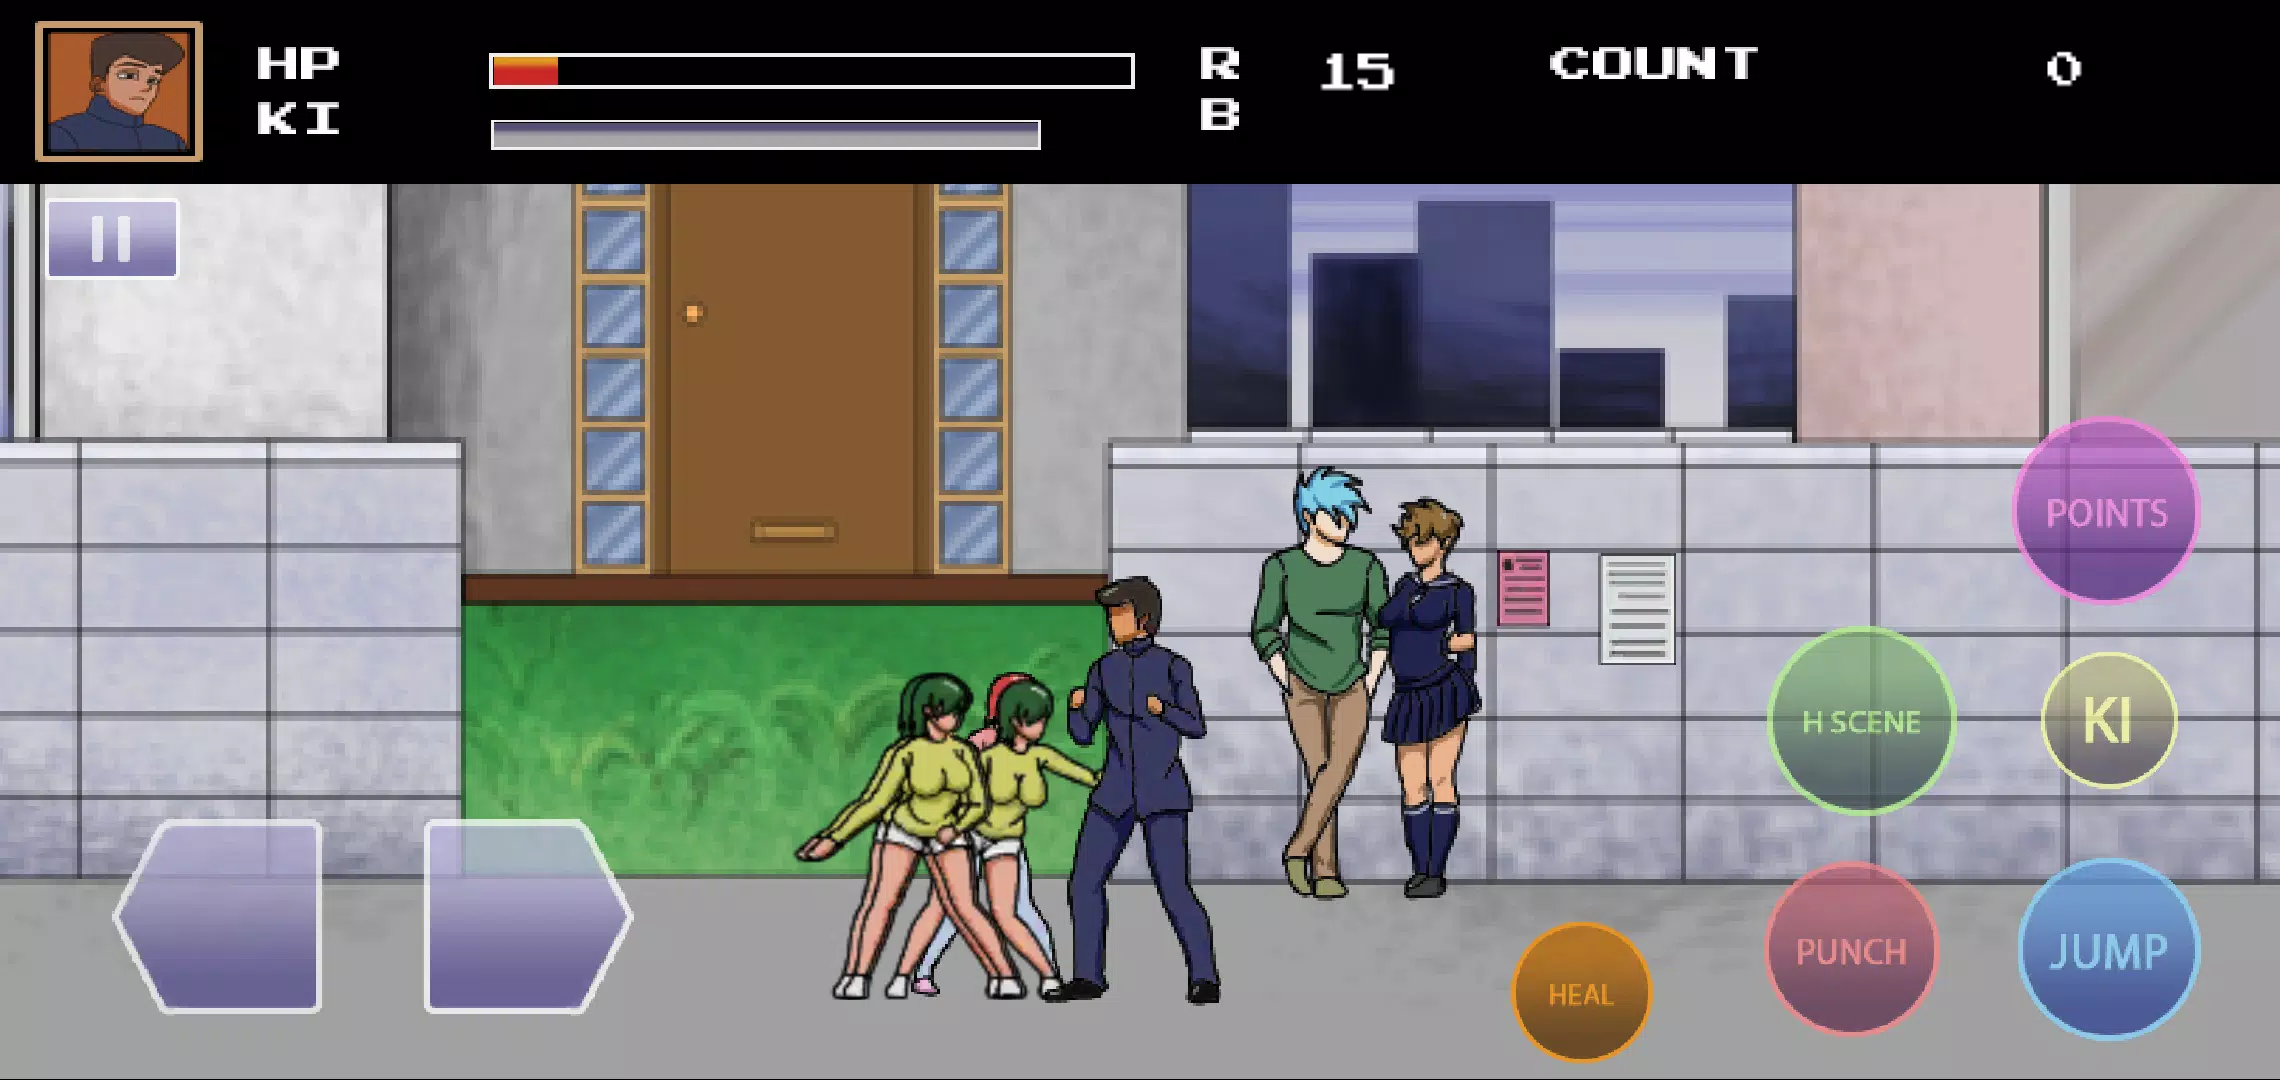 College Brawl 1.4.1 (Full game) Free Download For Android 2023